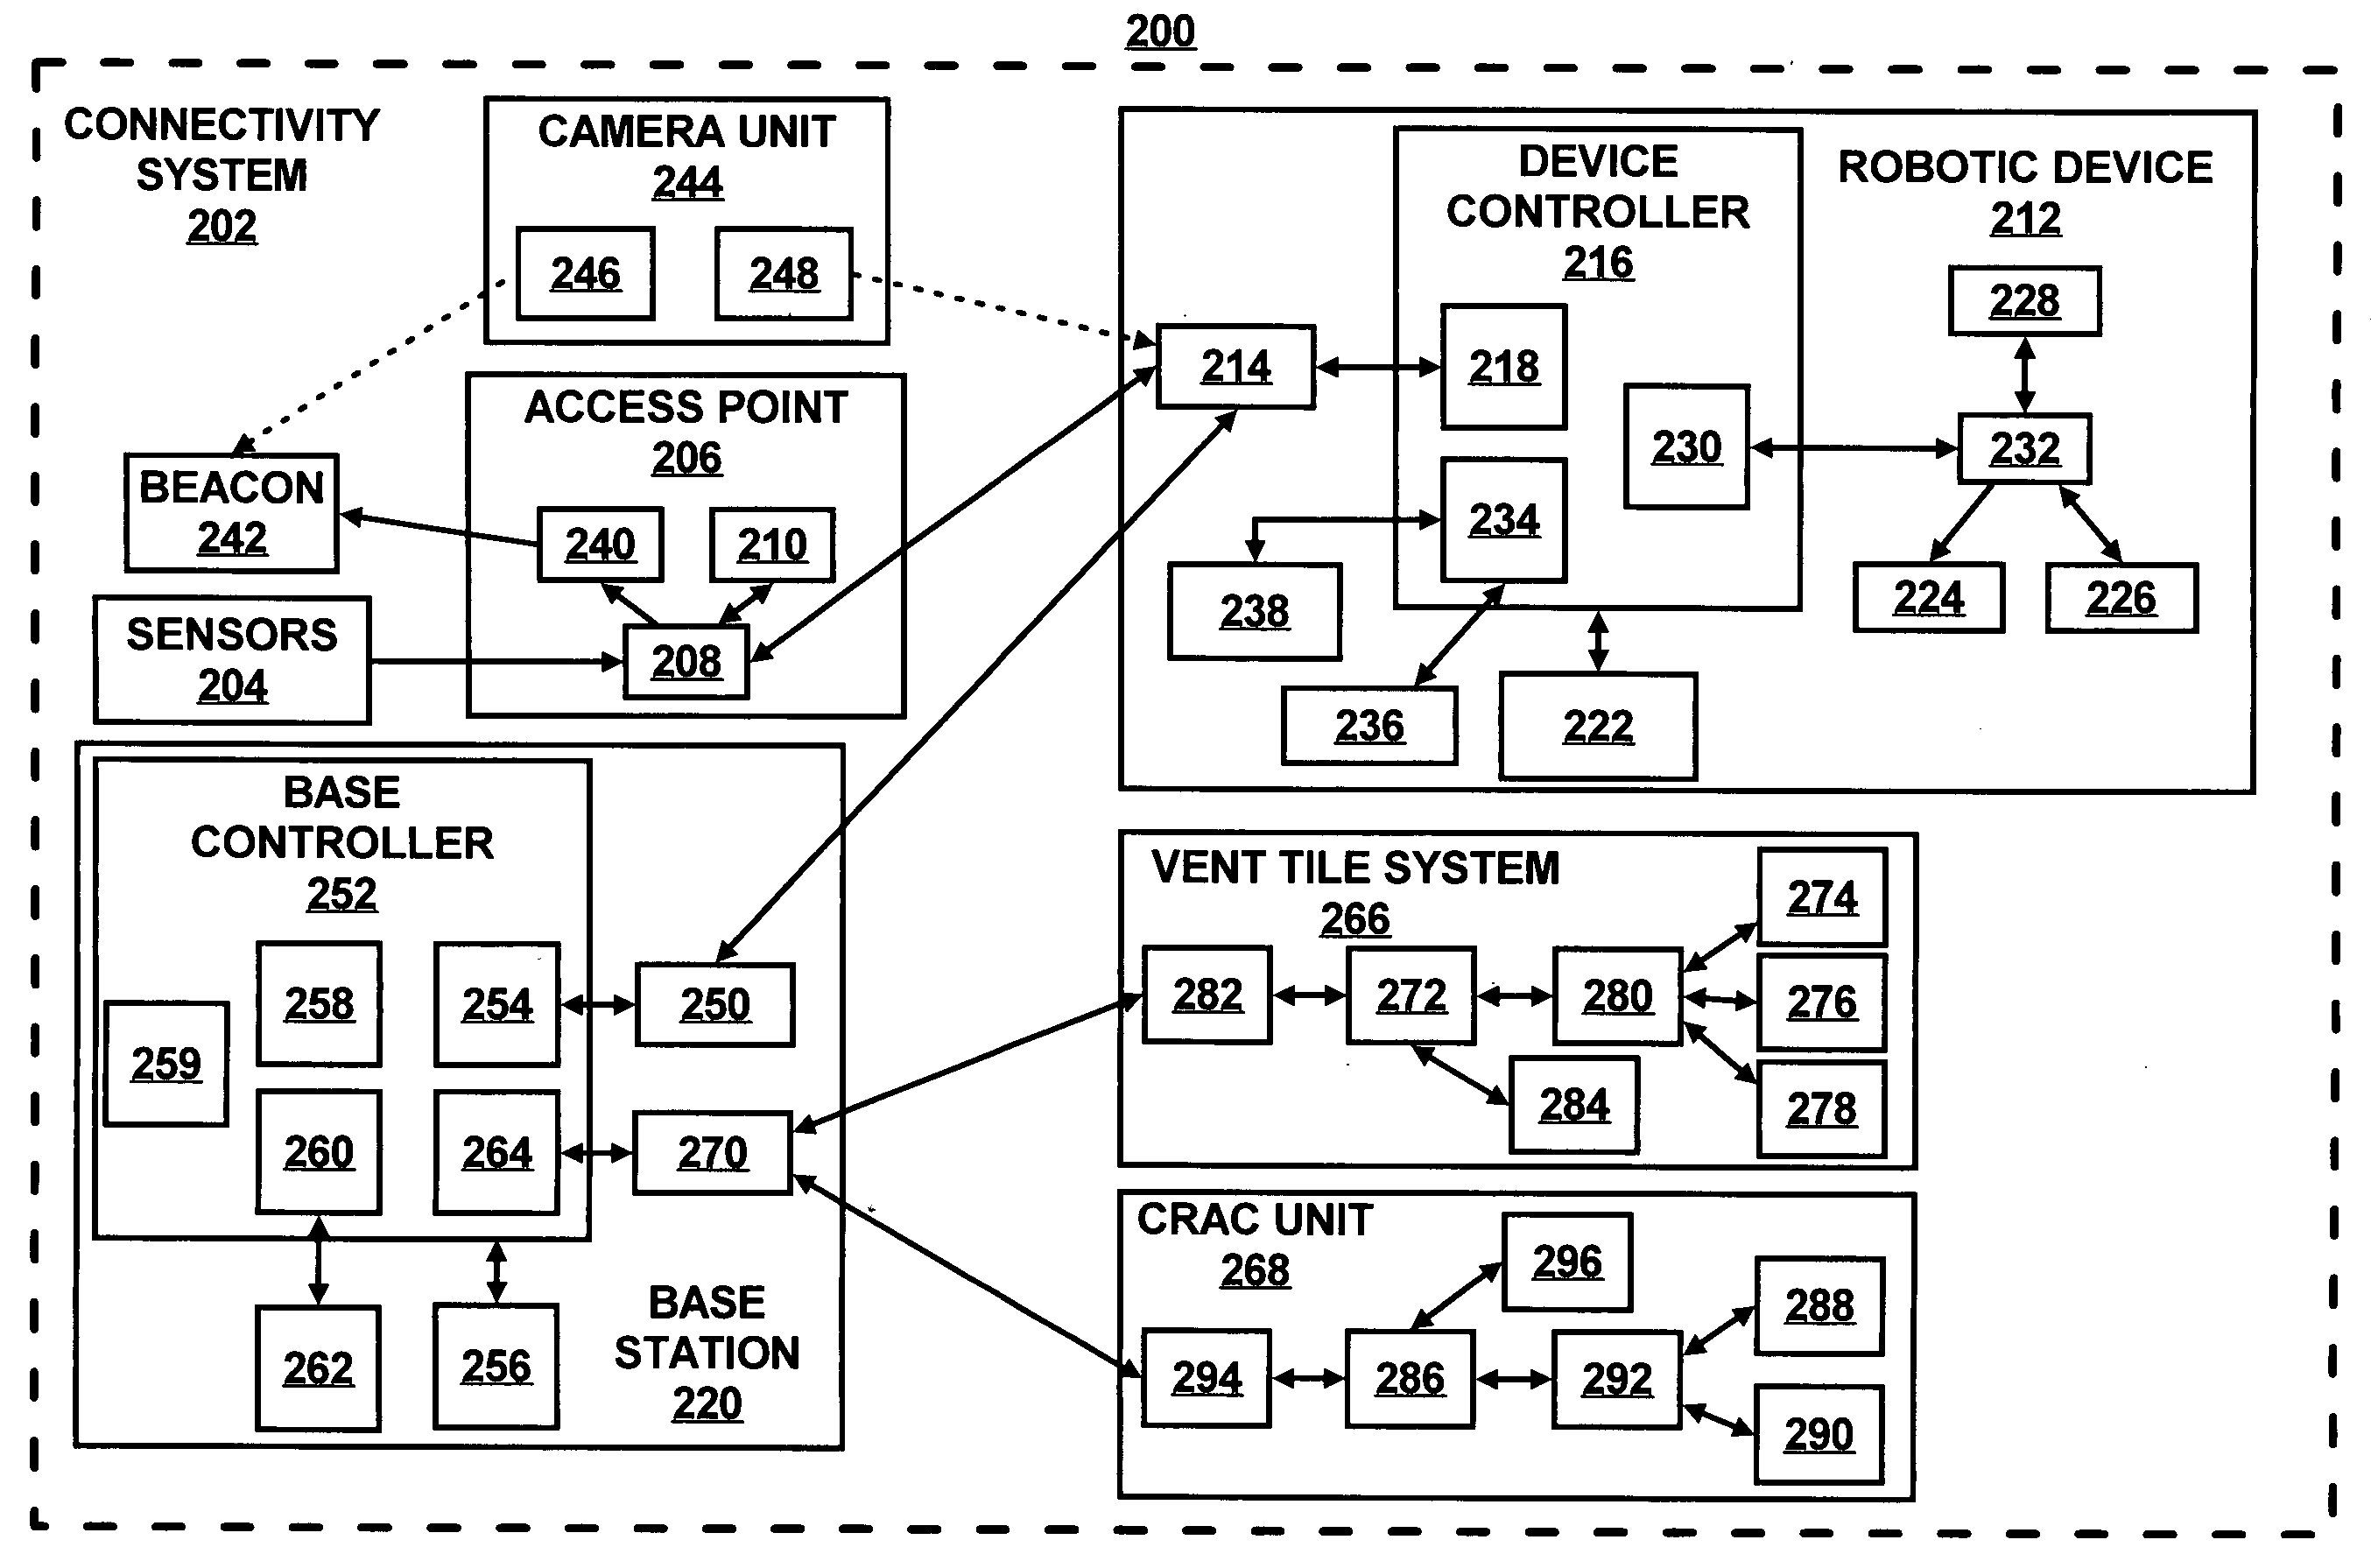 Data connectivity with a robotic device